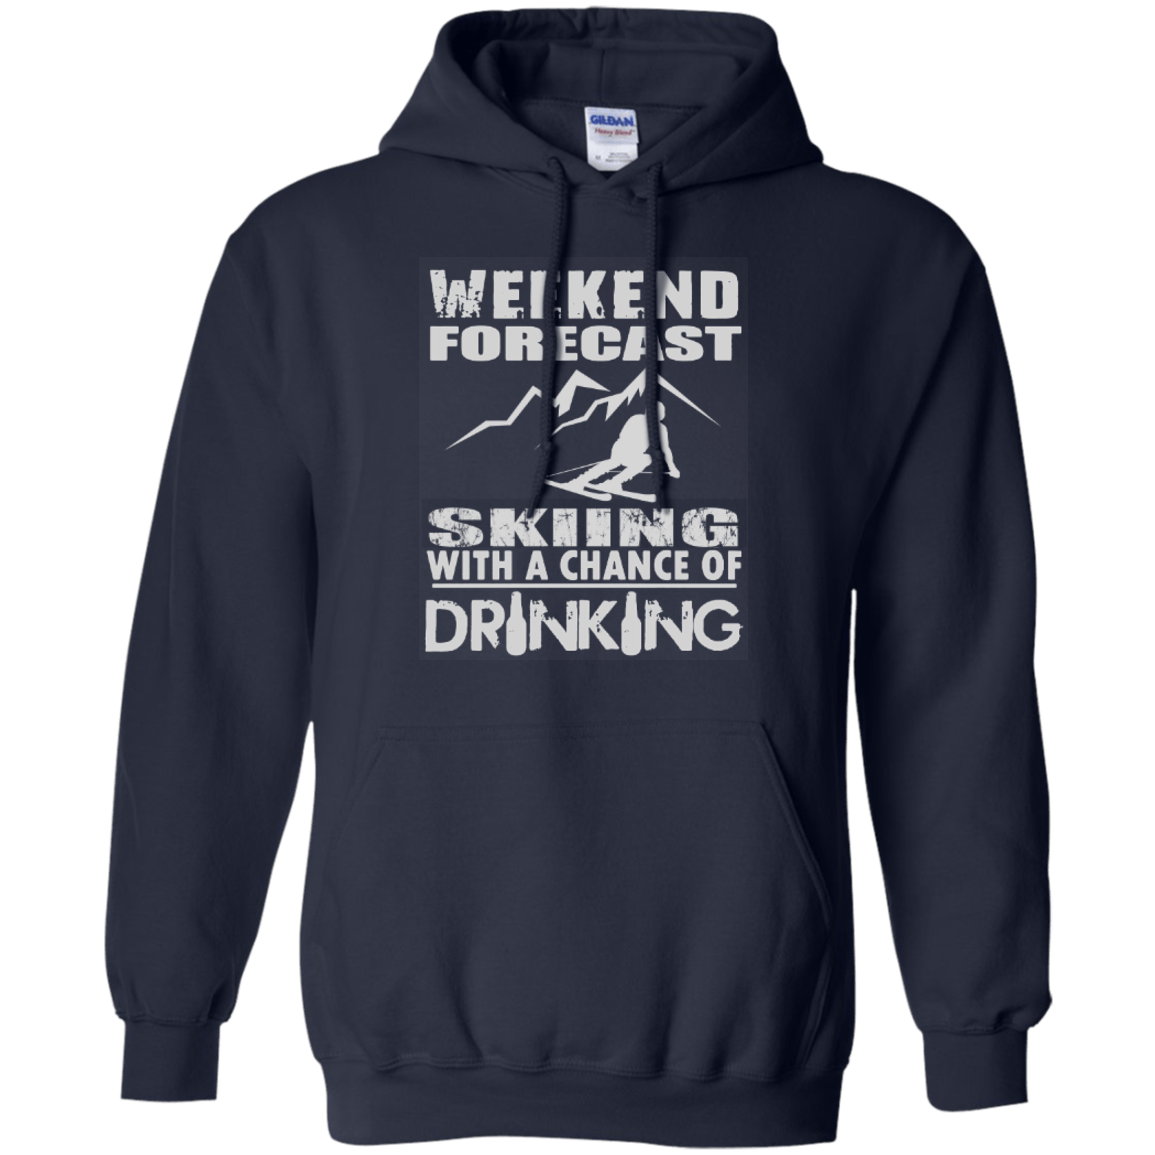 Weekend Forecast Skiing With A Chance of Drinking Hoodies - Powderaddicts